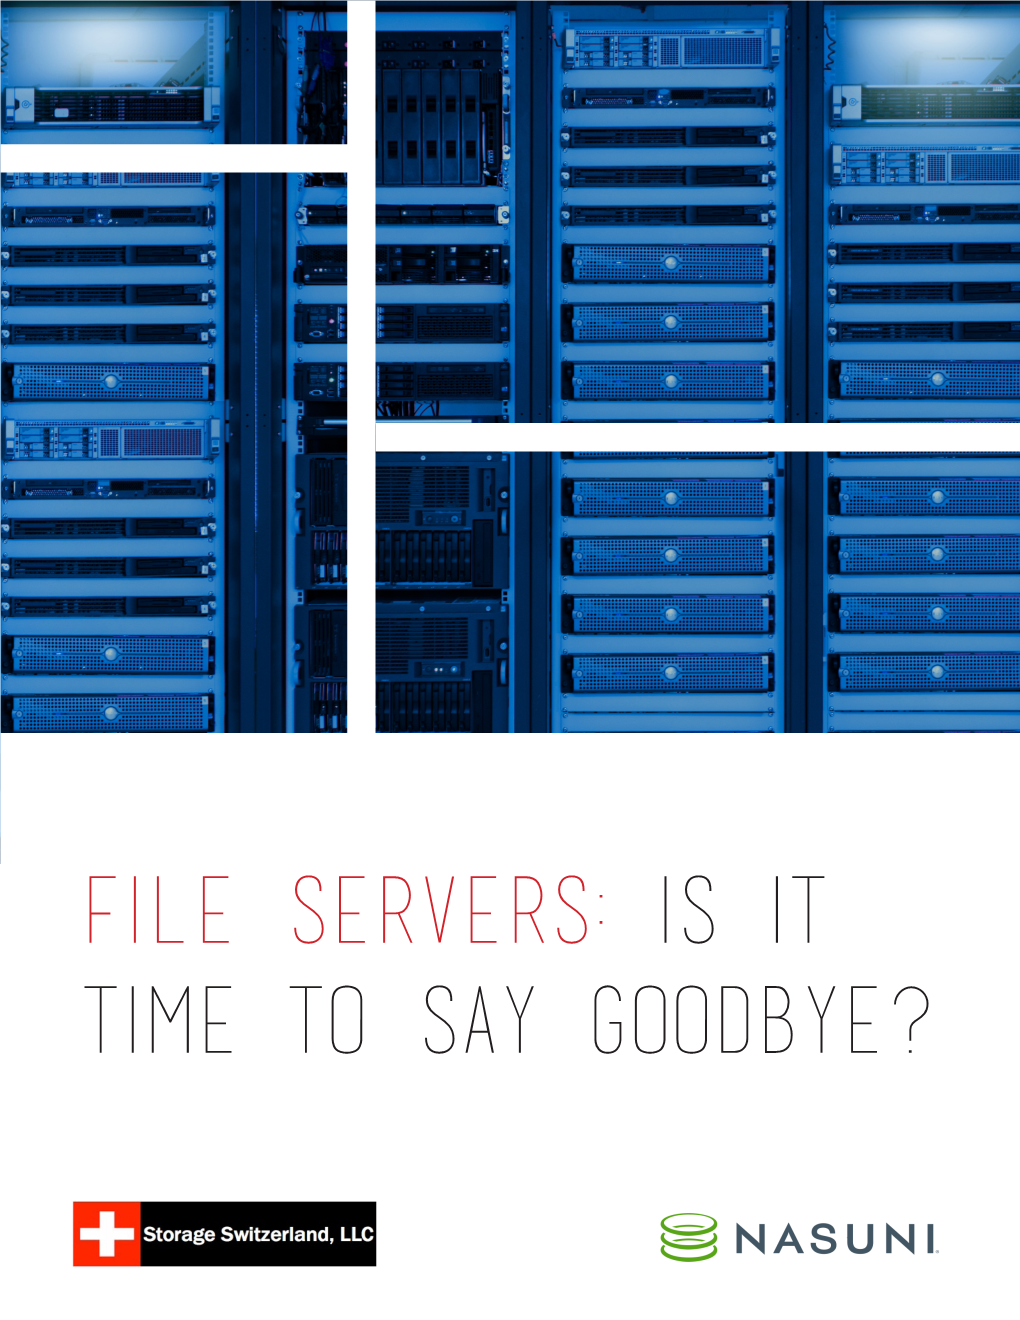 File Servers: Is It Time to Say Goodbye? Unstructured Data Is the Fastest-Growing Segment of Data in the Data Center